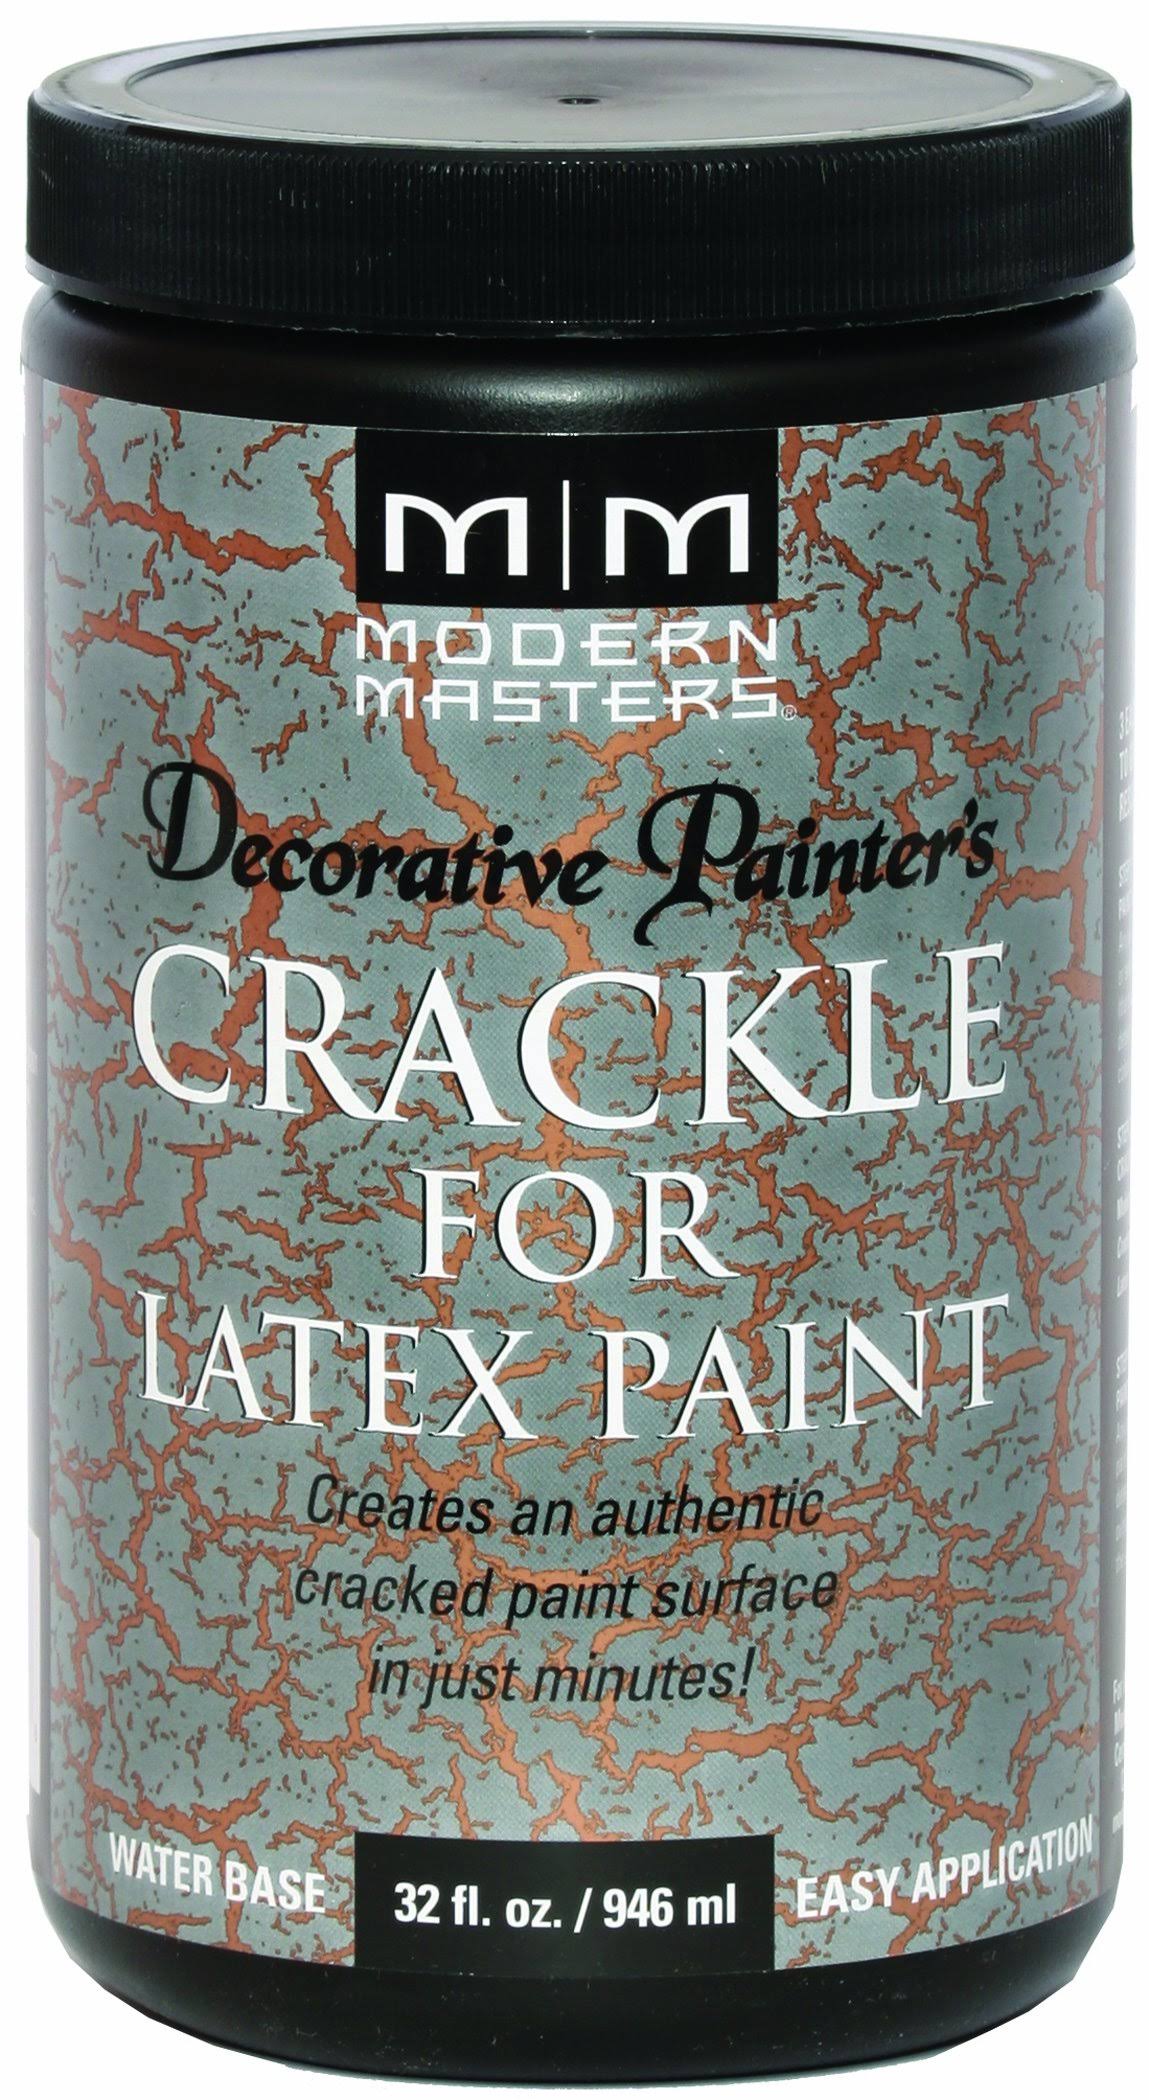 Modern Masters Decorative Painter's Crackle For Latex Paint - 946ml